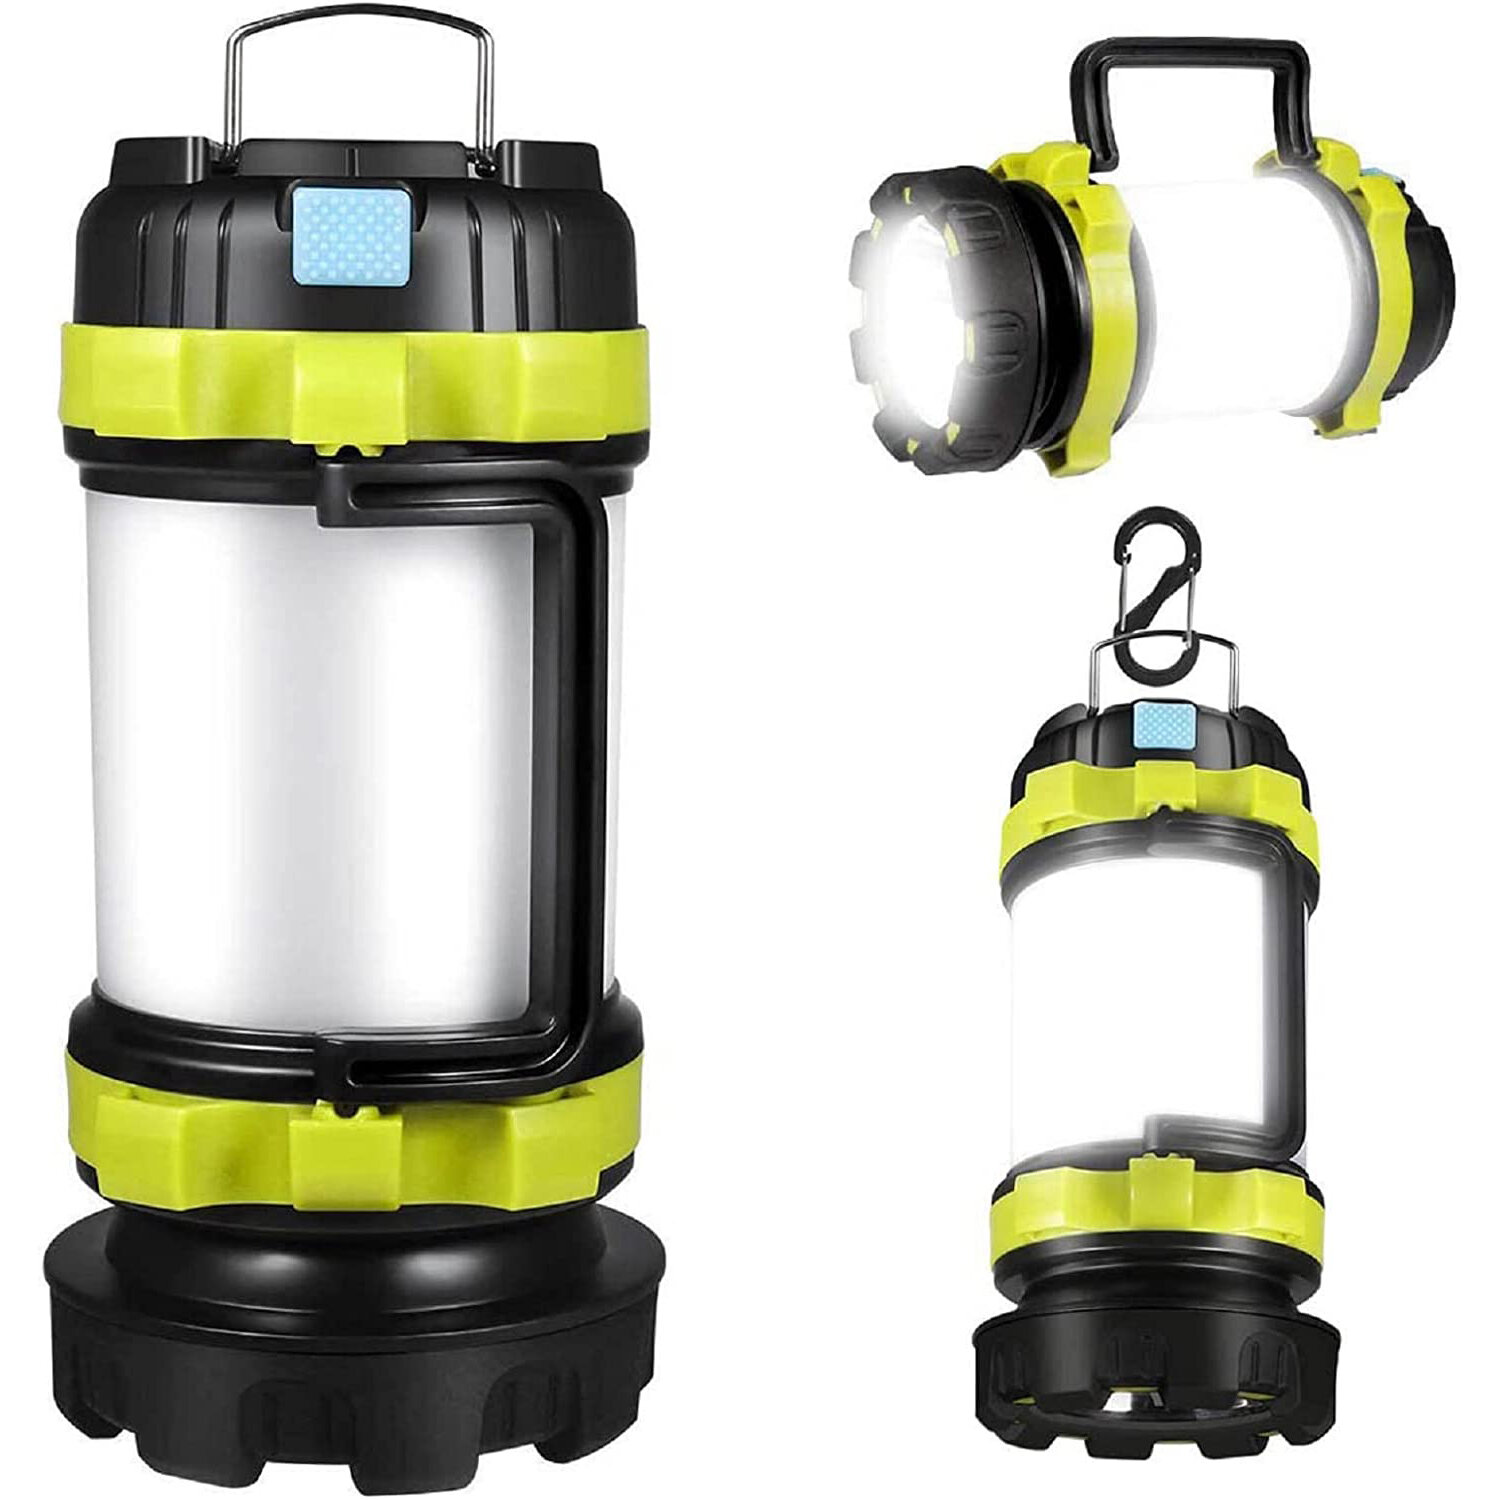 Rechargeable LED Torch Waterproof Camping Light Lantern W/ Power Bank